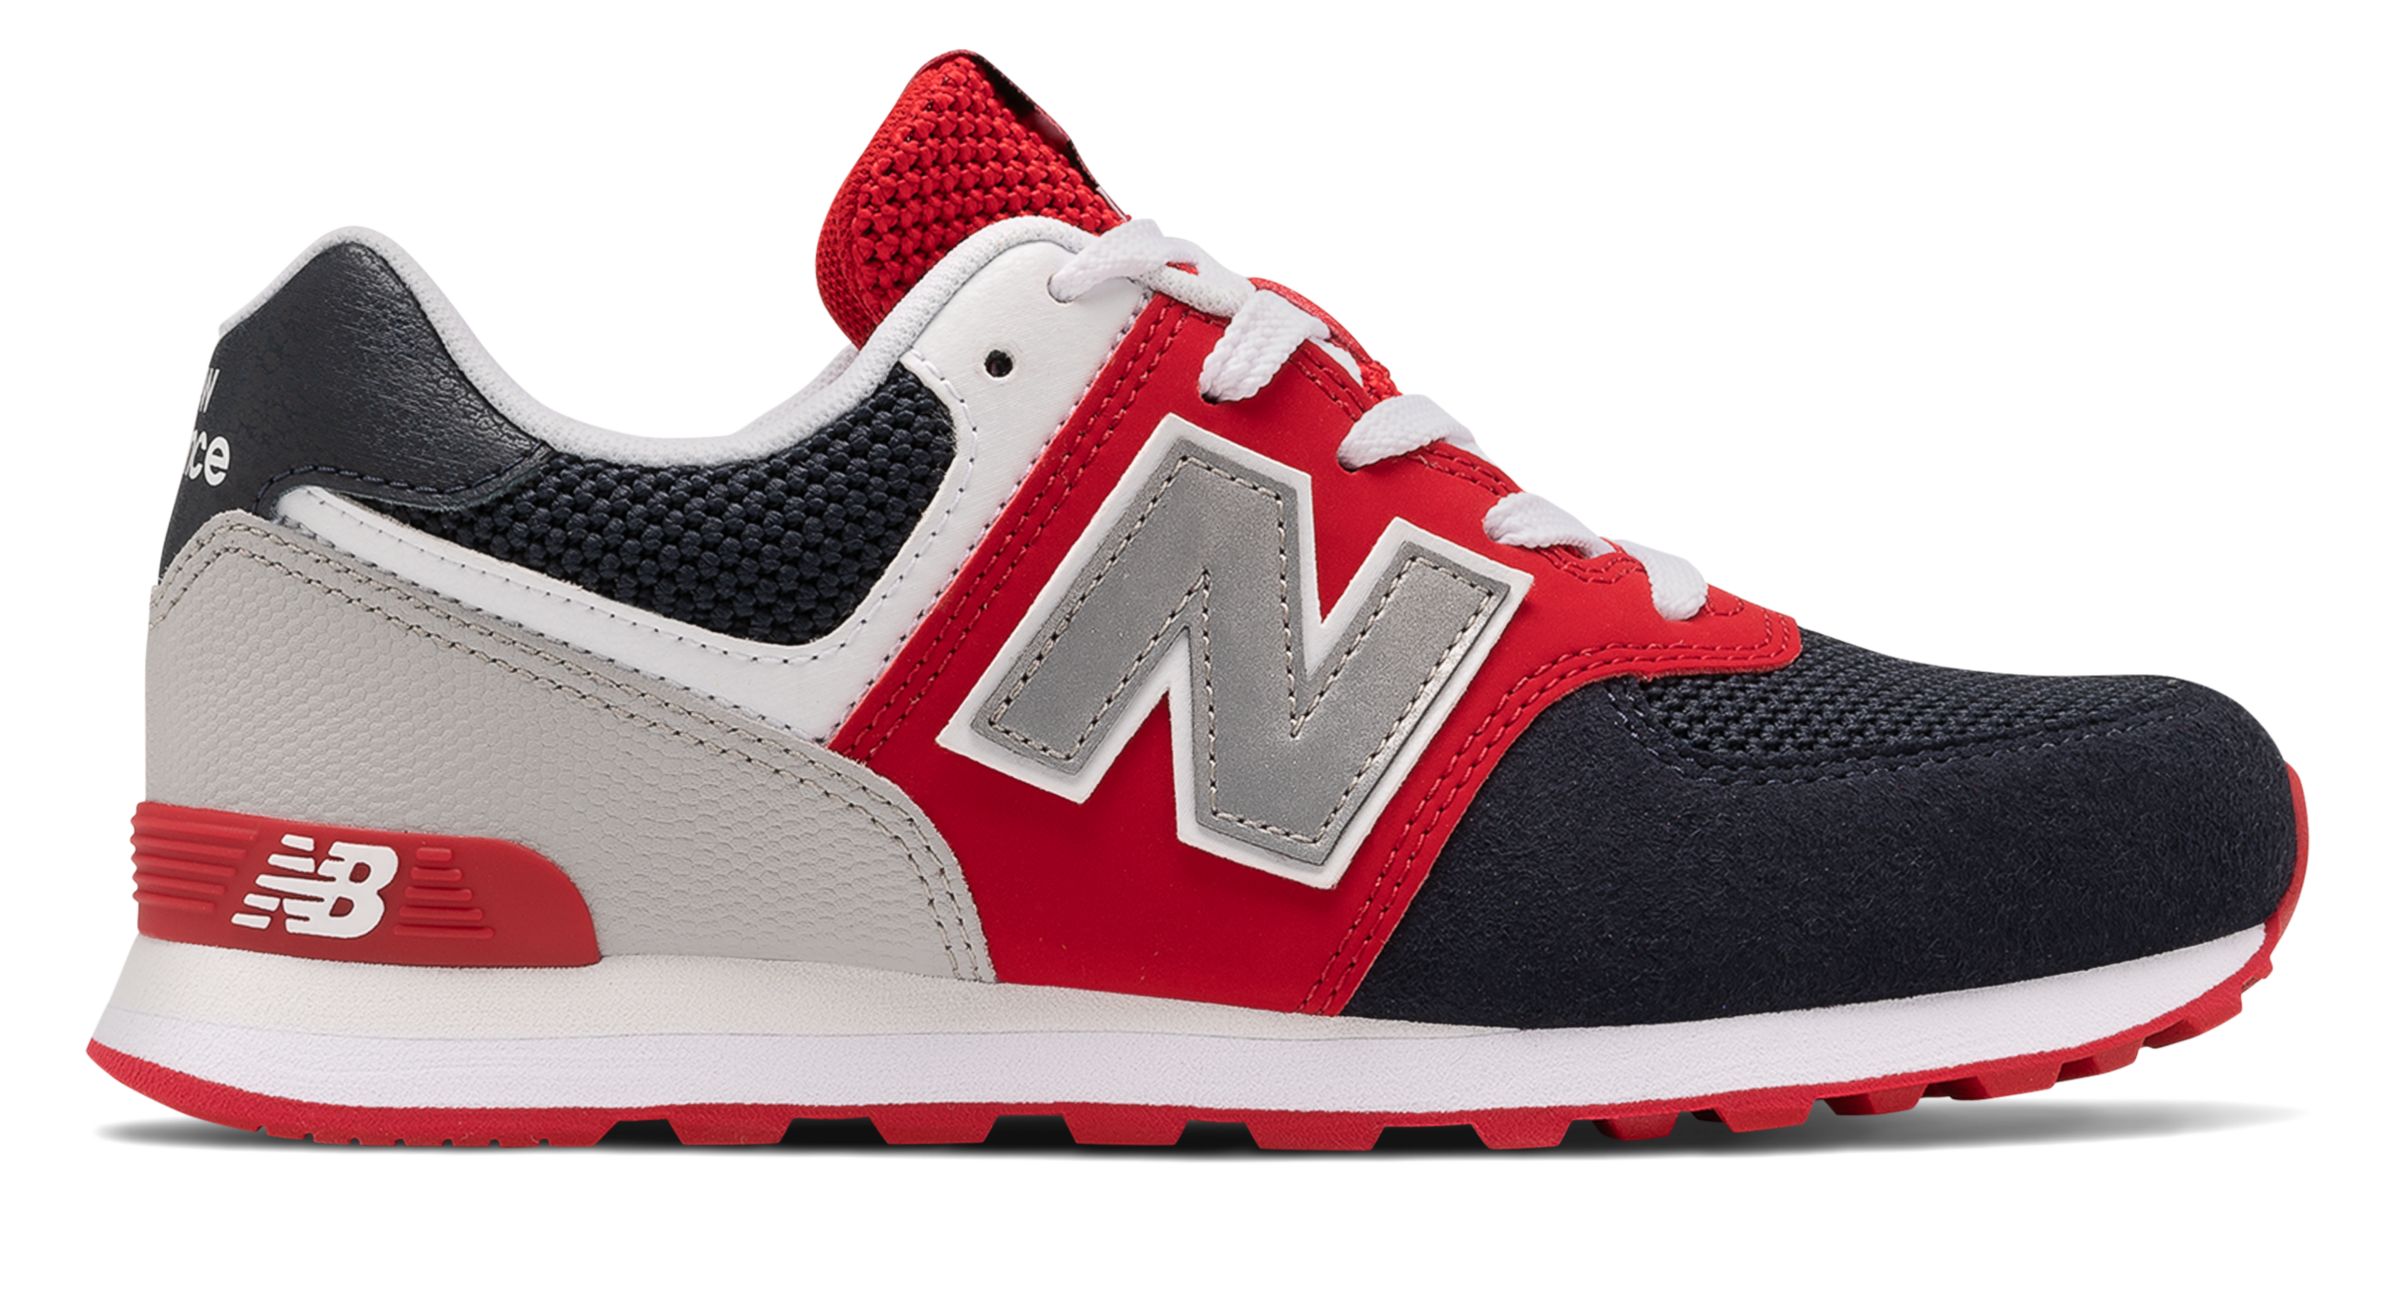 New Balance Kid's 574 Big Kids Male Shoes Blue with Red | eBay